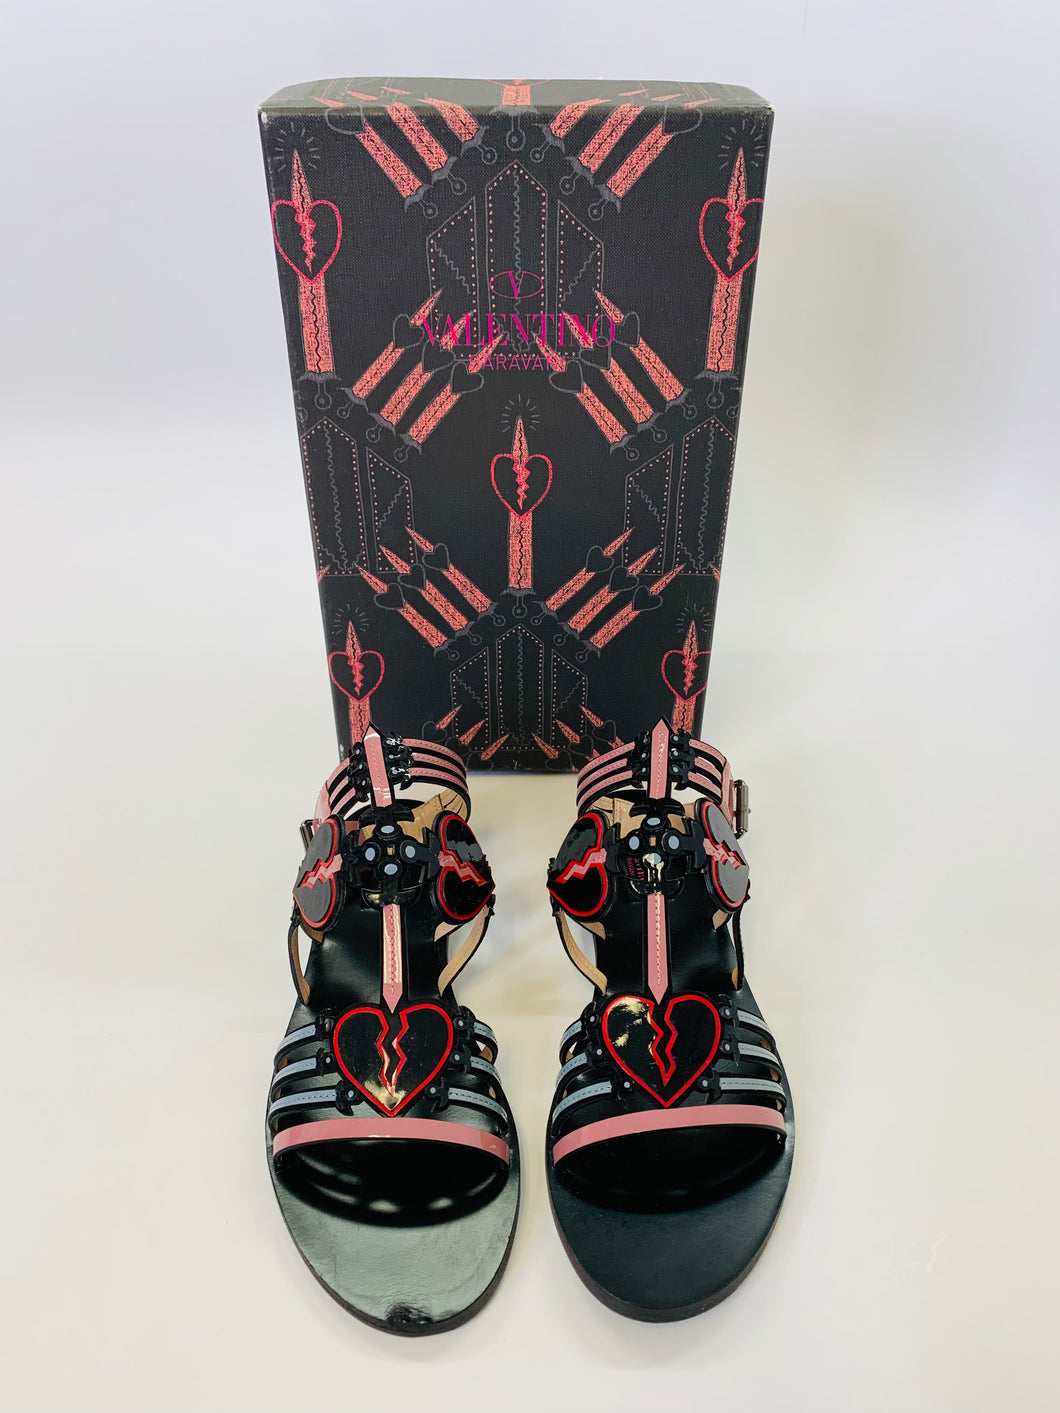 Valentino Garavani Pink and Red Heart Sandals Sizes 37 and 39 1/2